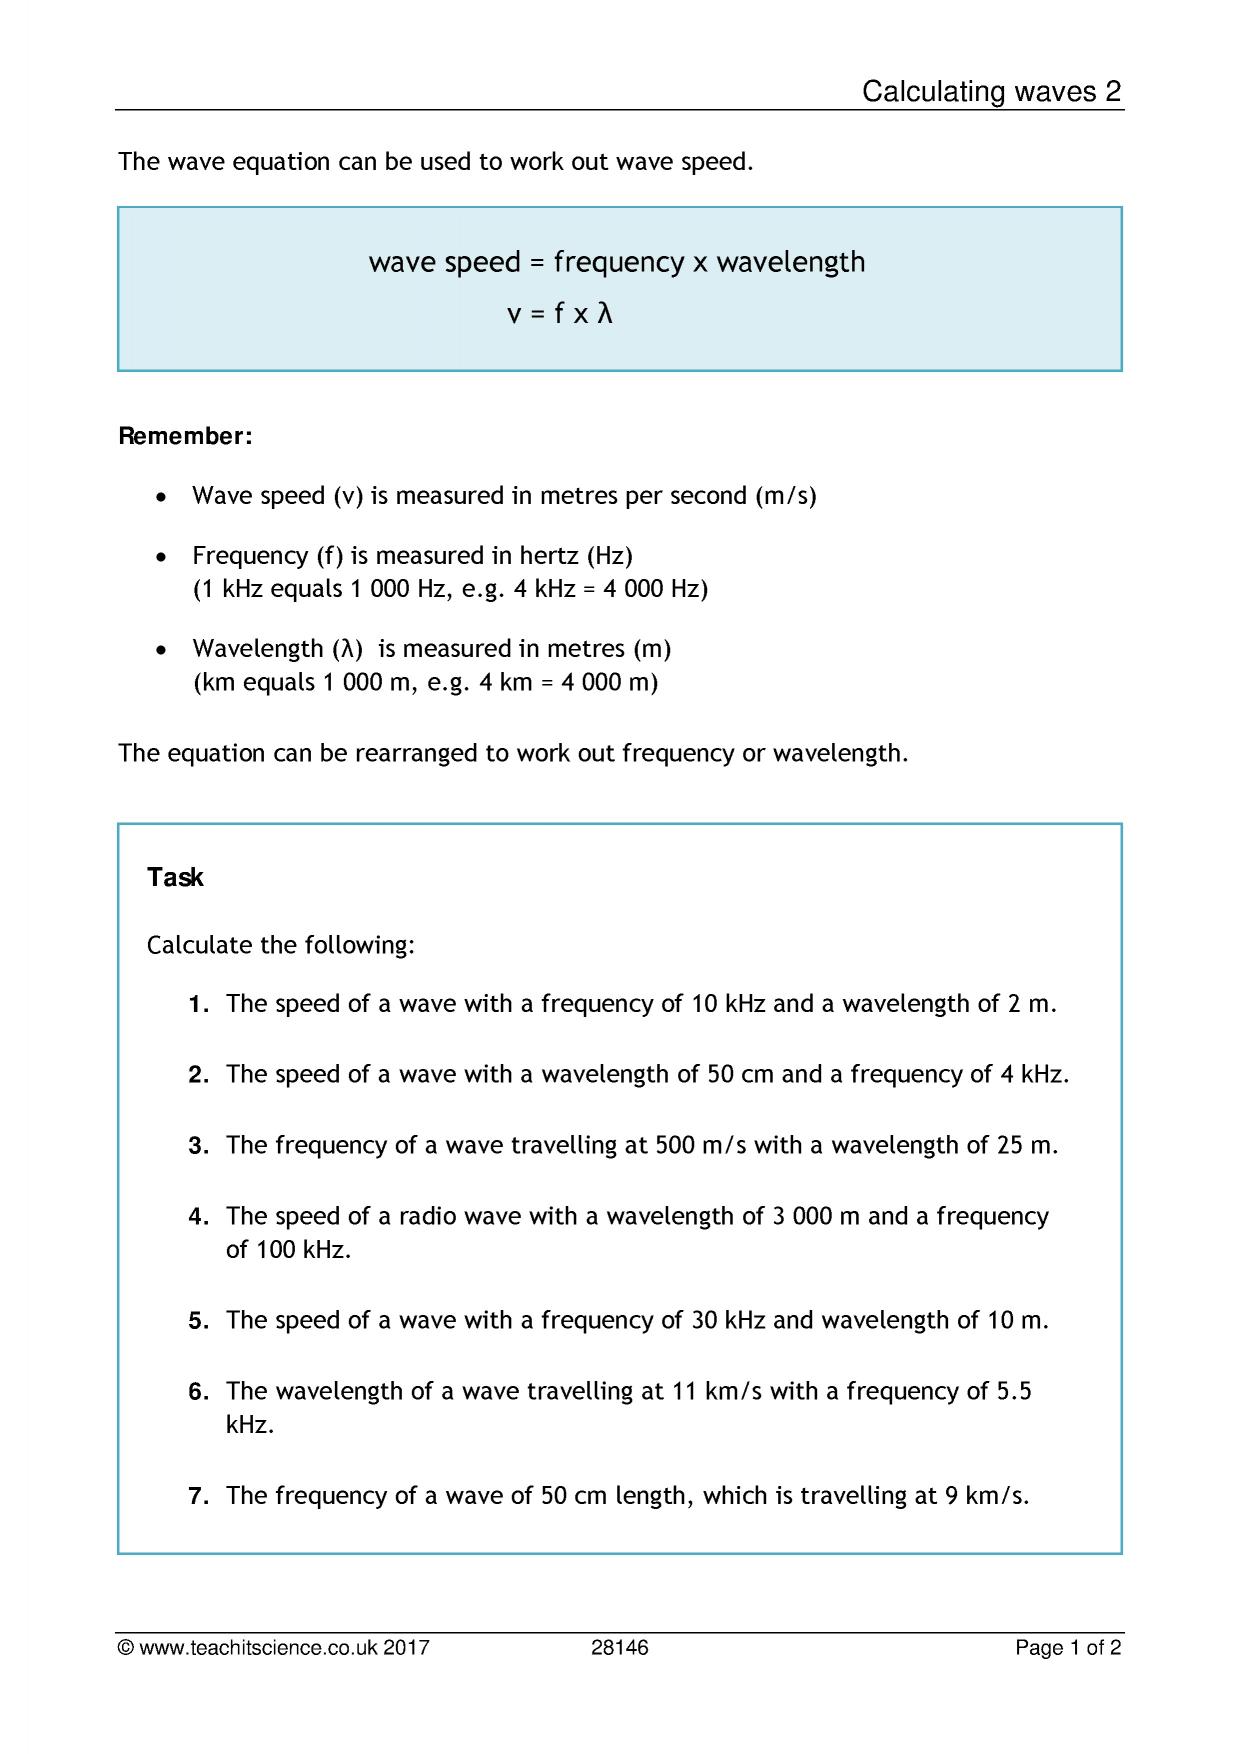 Calculating Wave Speed Frequency And Wavelength Worksheet With Answers